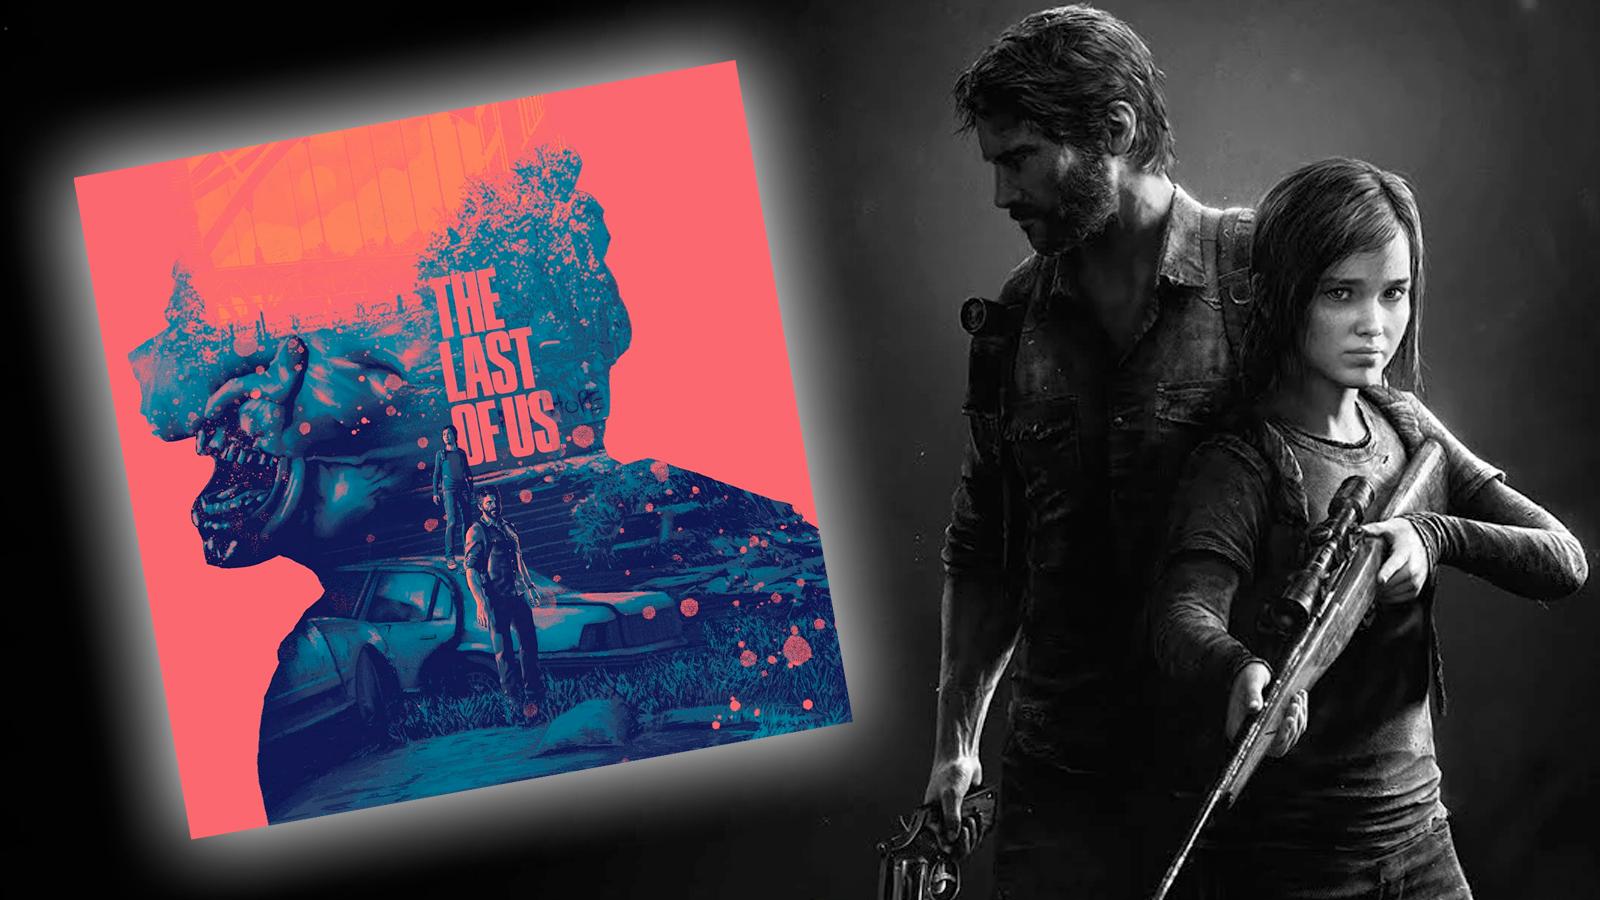 the last of us part 1 art next to the vinyl